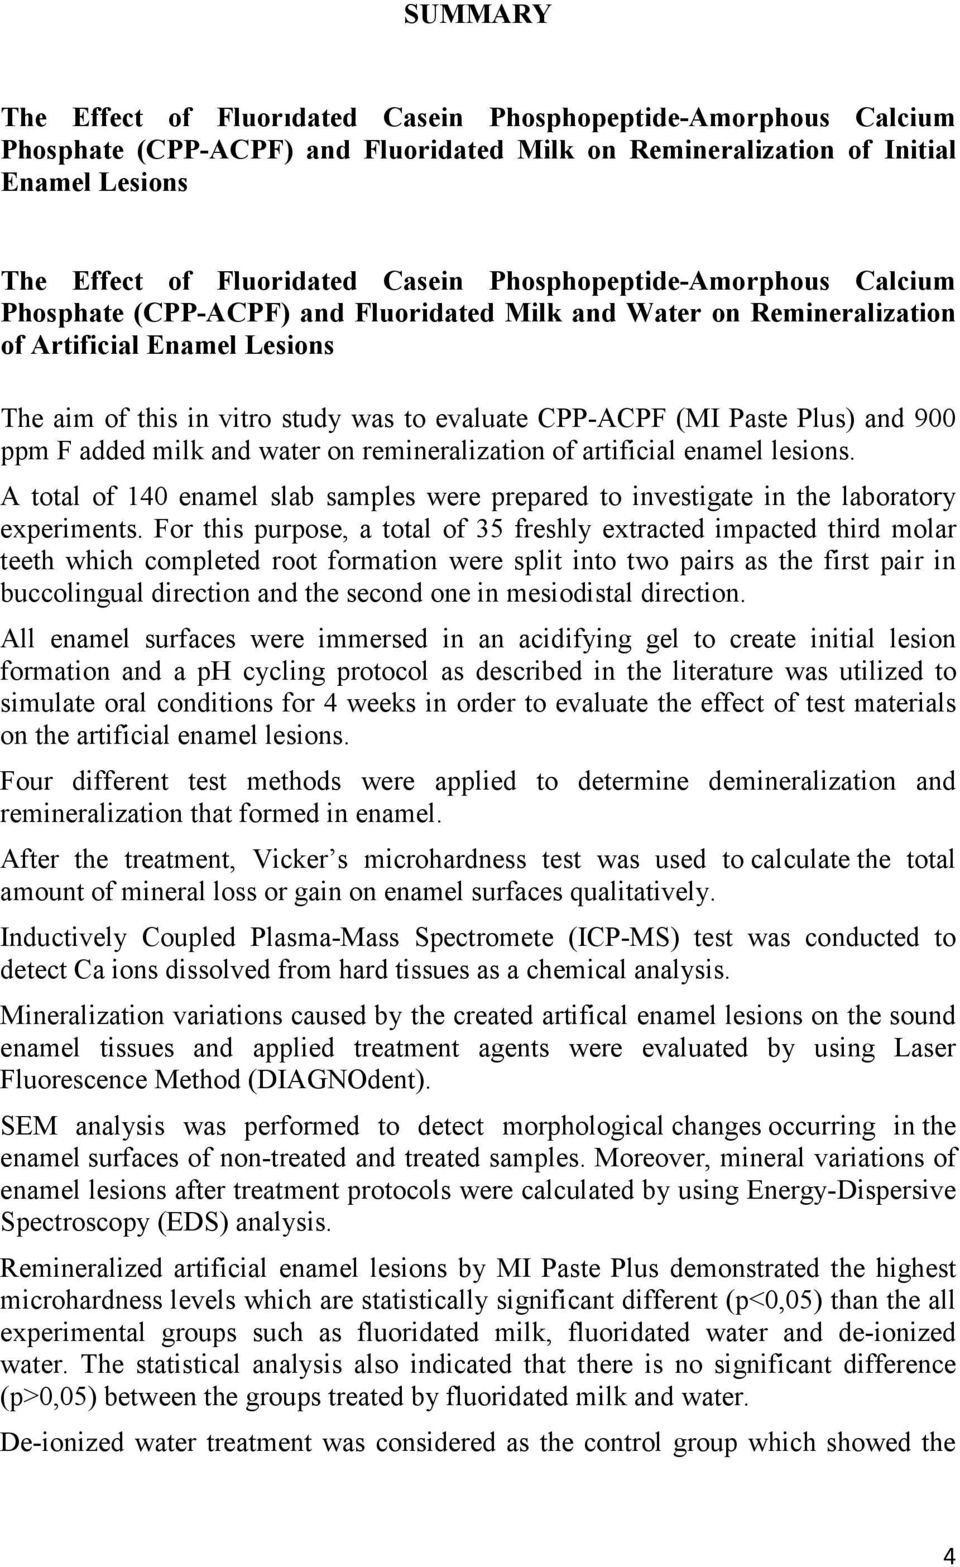 Plus) and 900 ppm F added milk and water on remineralization of artificial enamel lesions. A total of 140 enamel slab samples were prepared to investigate in the laboratory experiments.